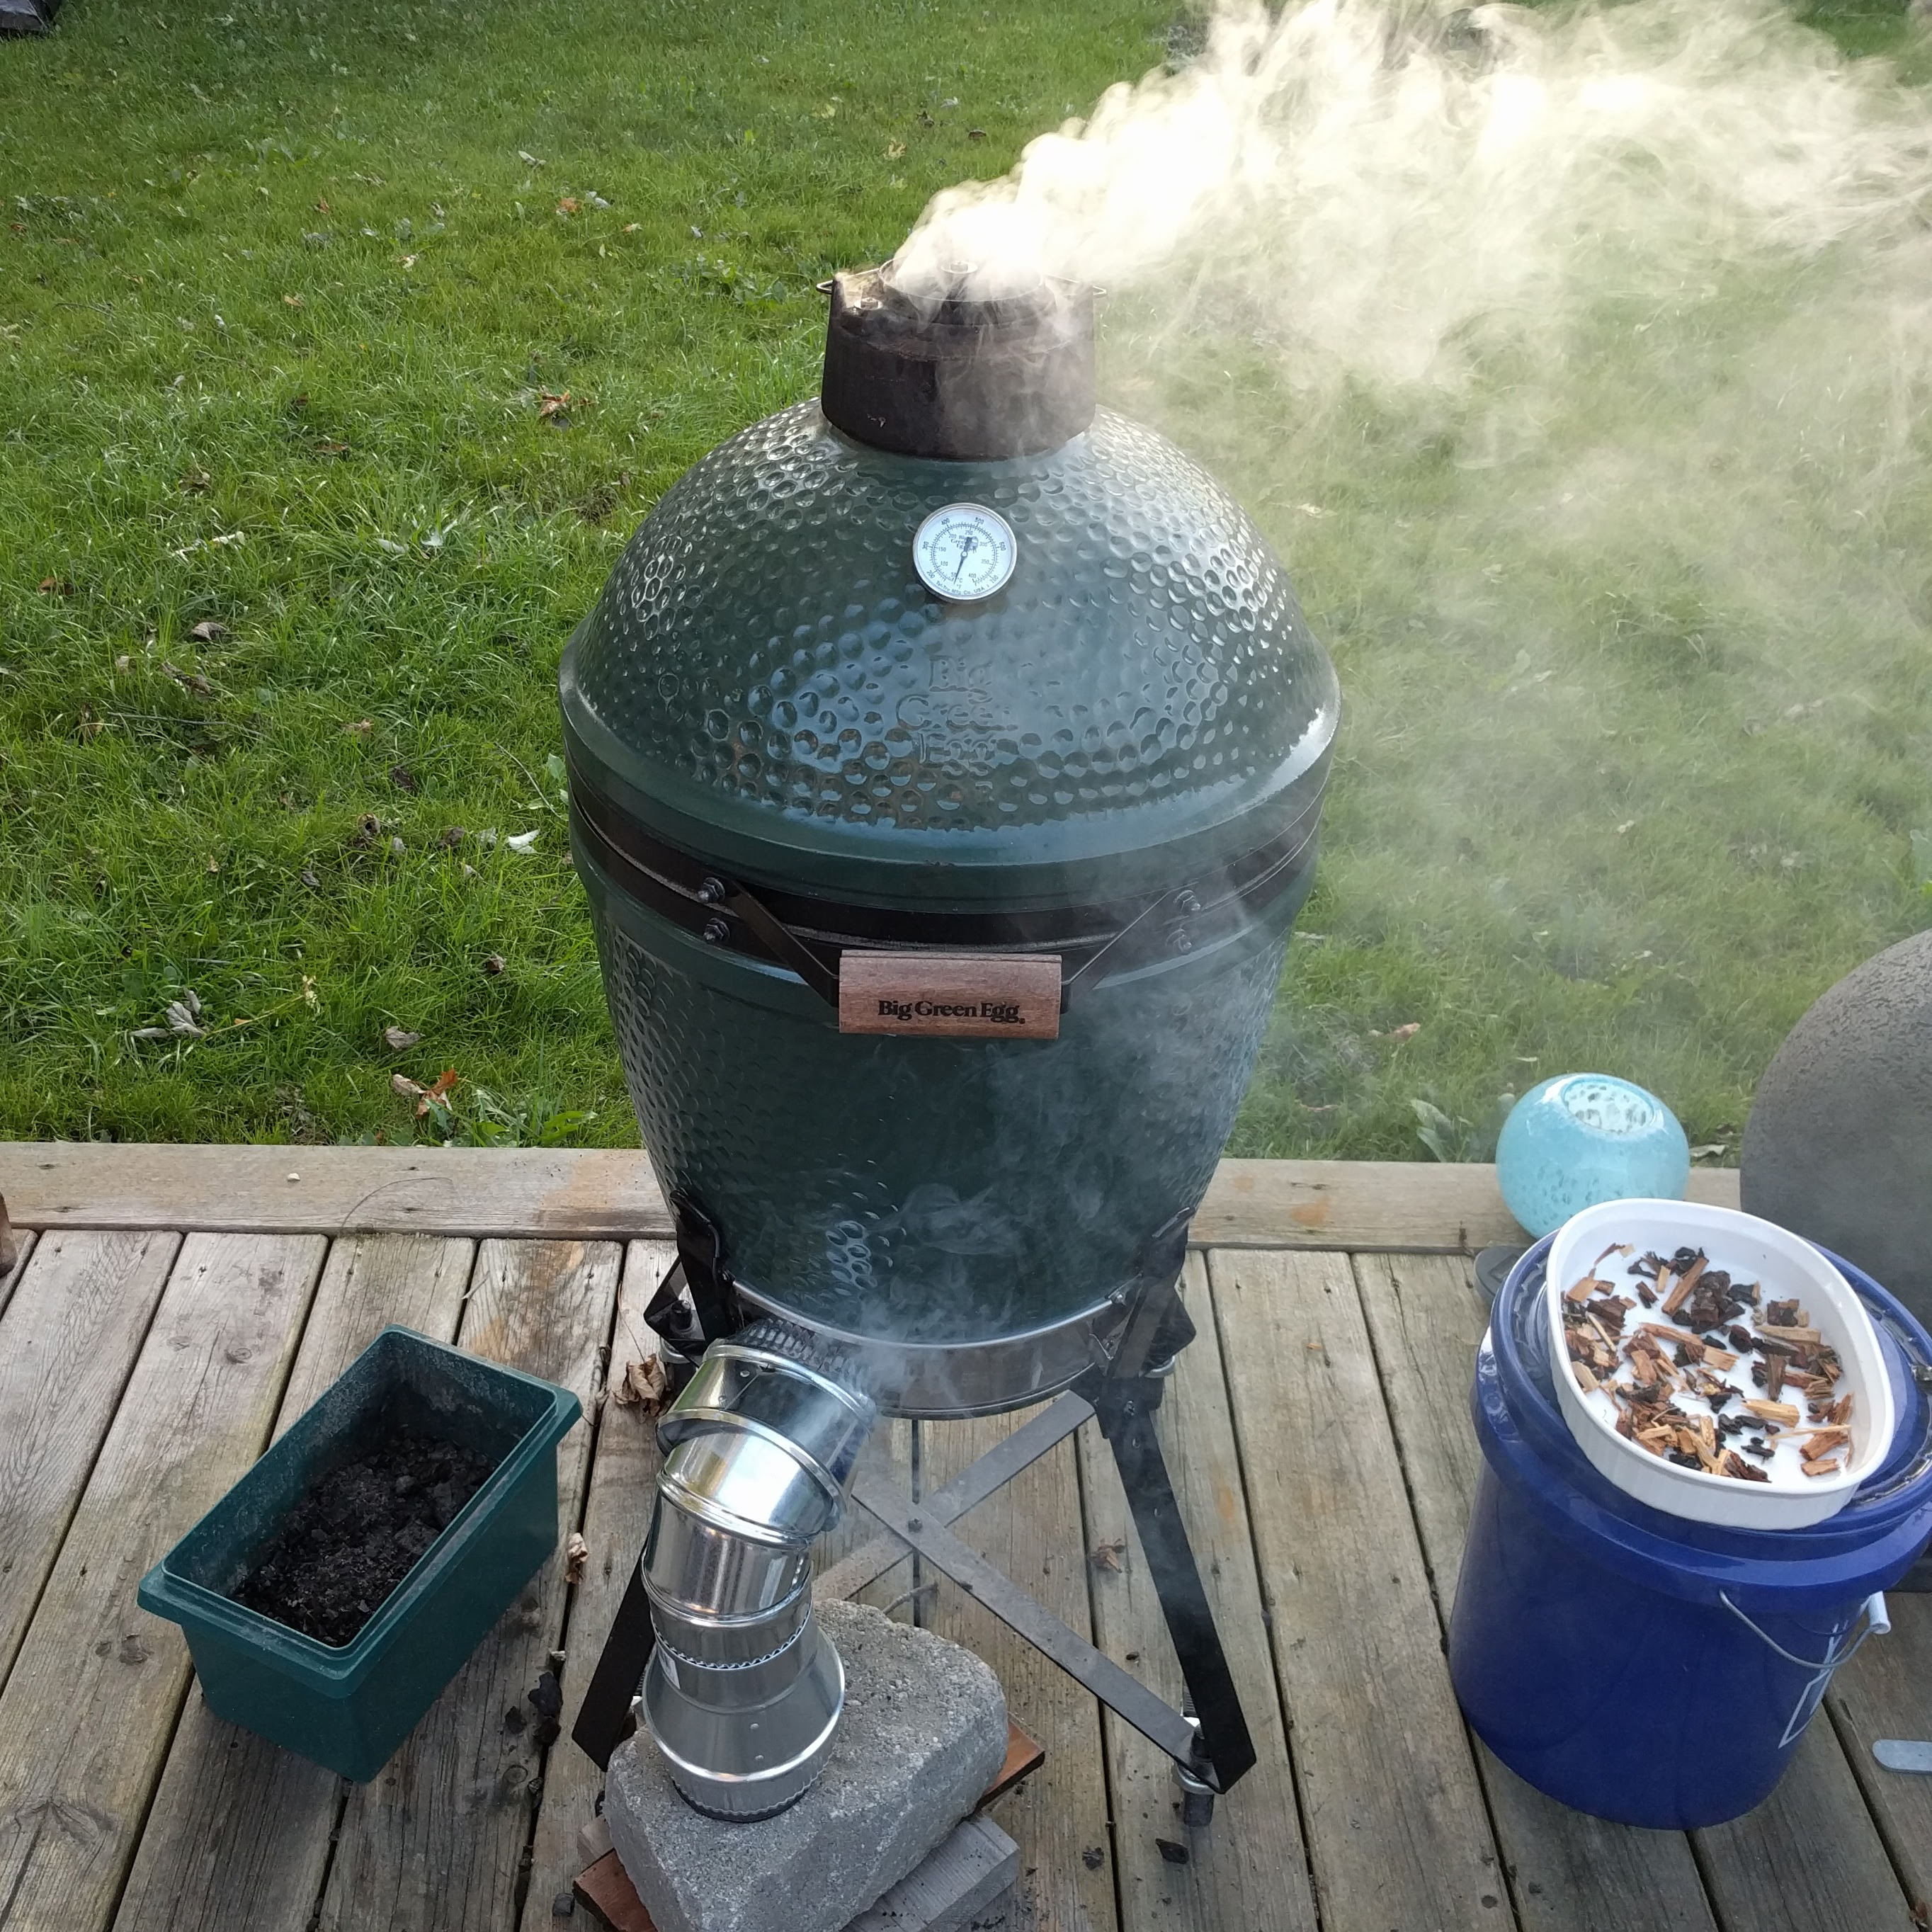 My first Kamado grill, the Big Green Egg.